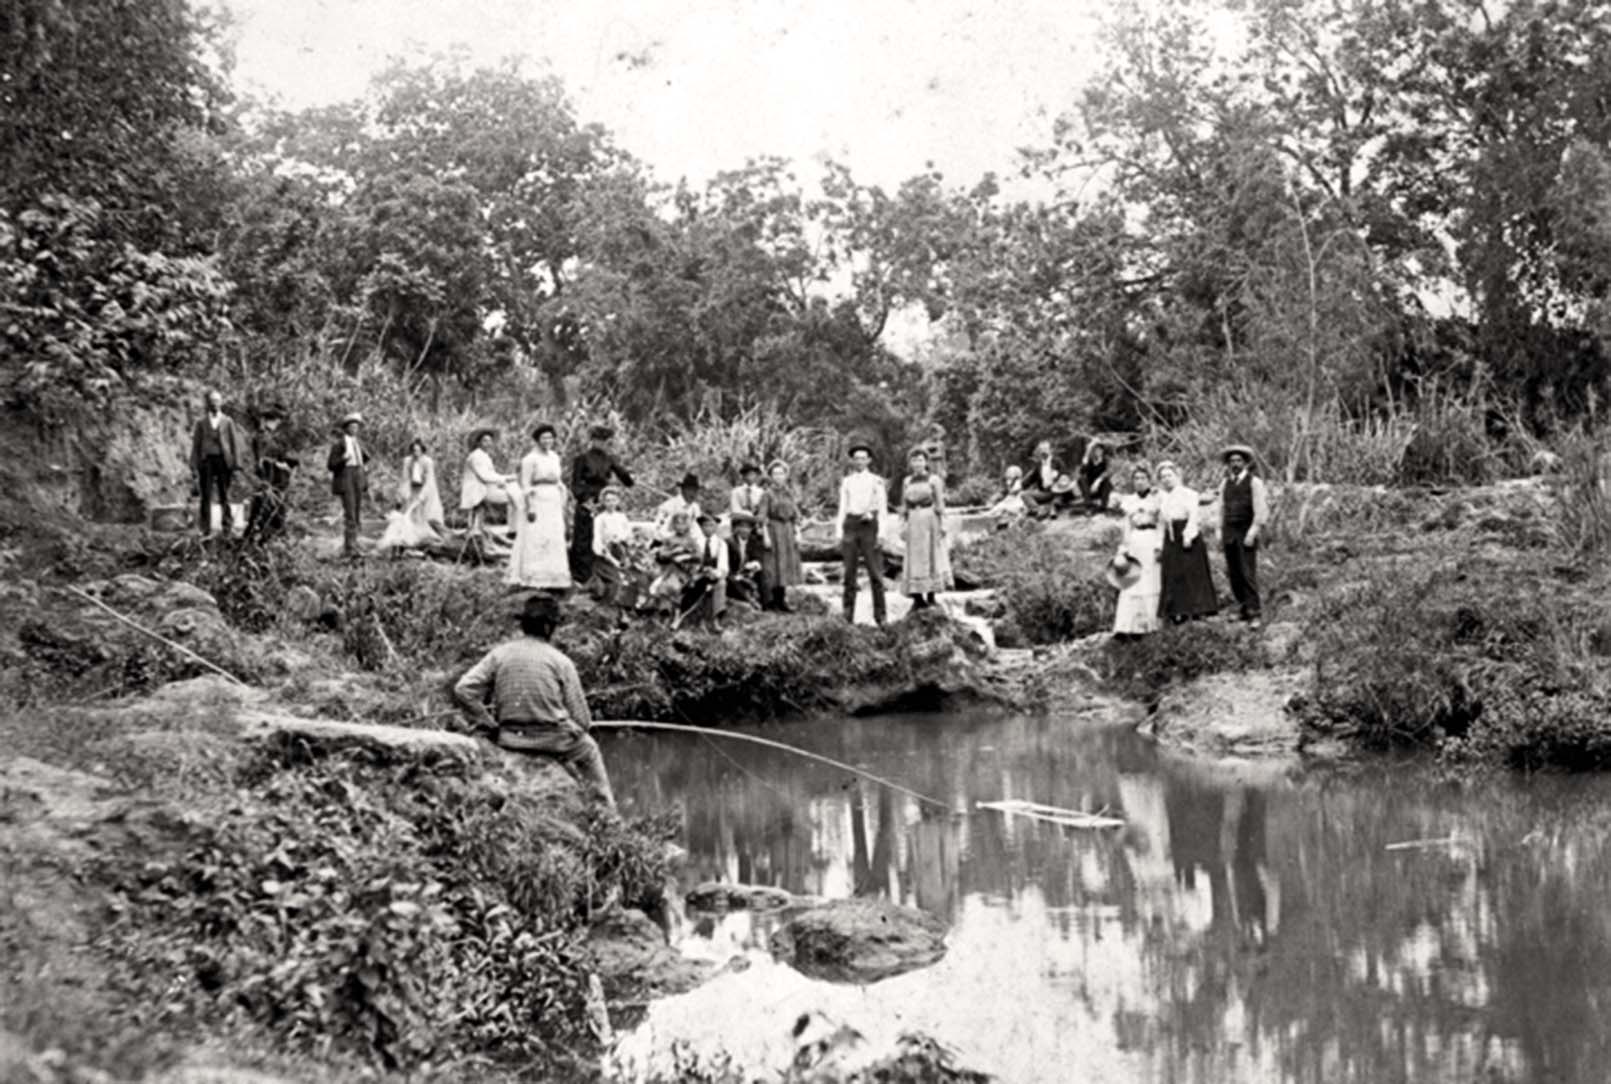 A historic photograph of people standing around a body of water